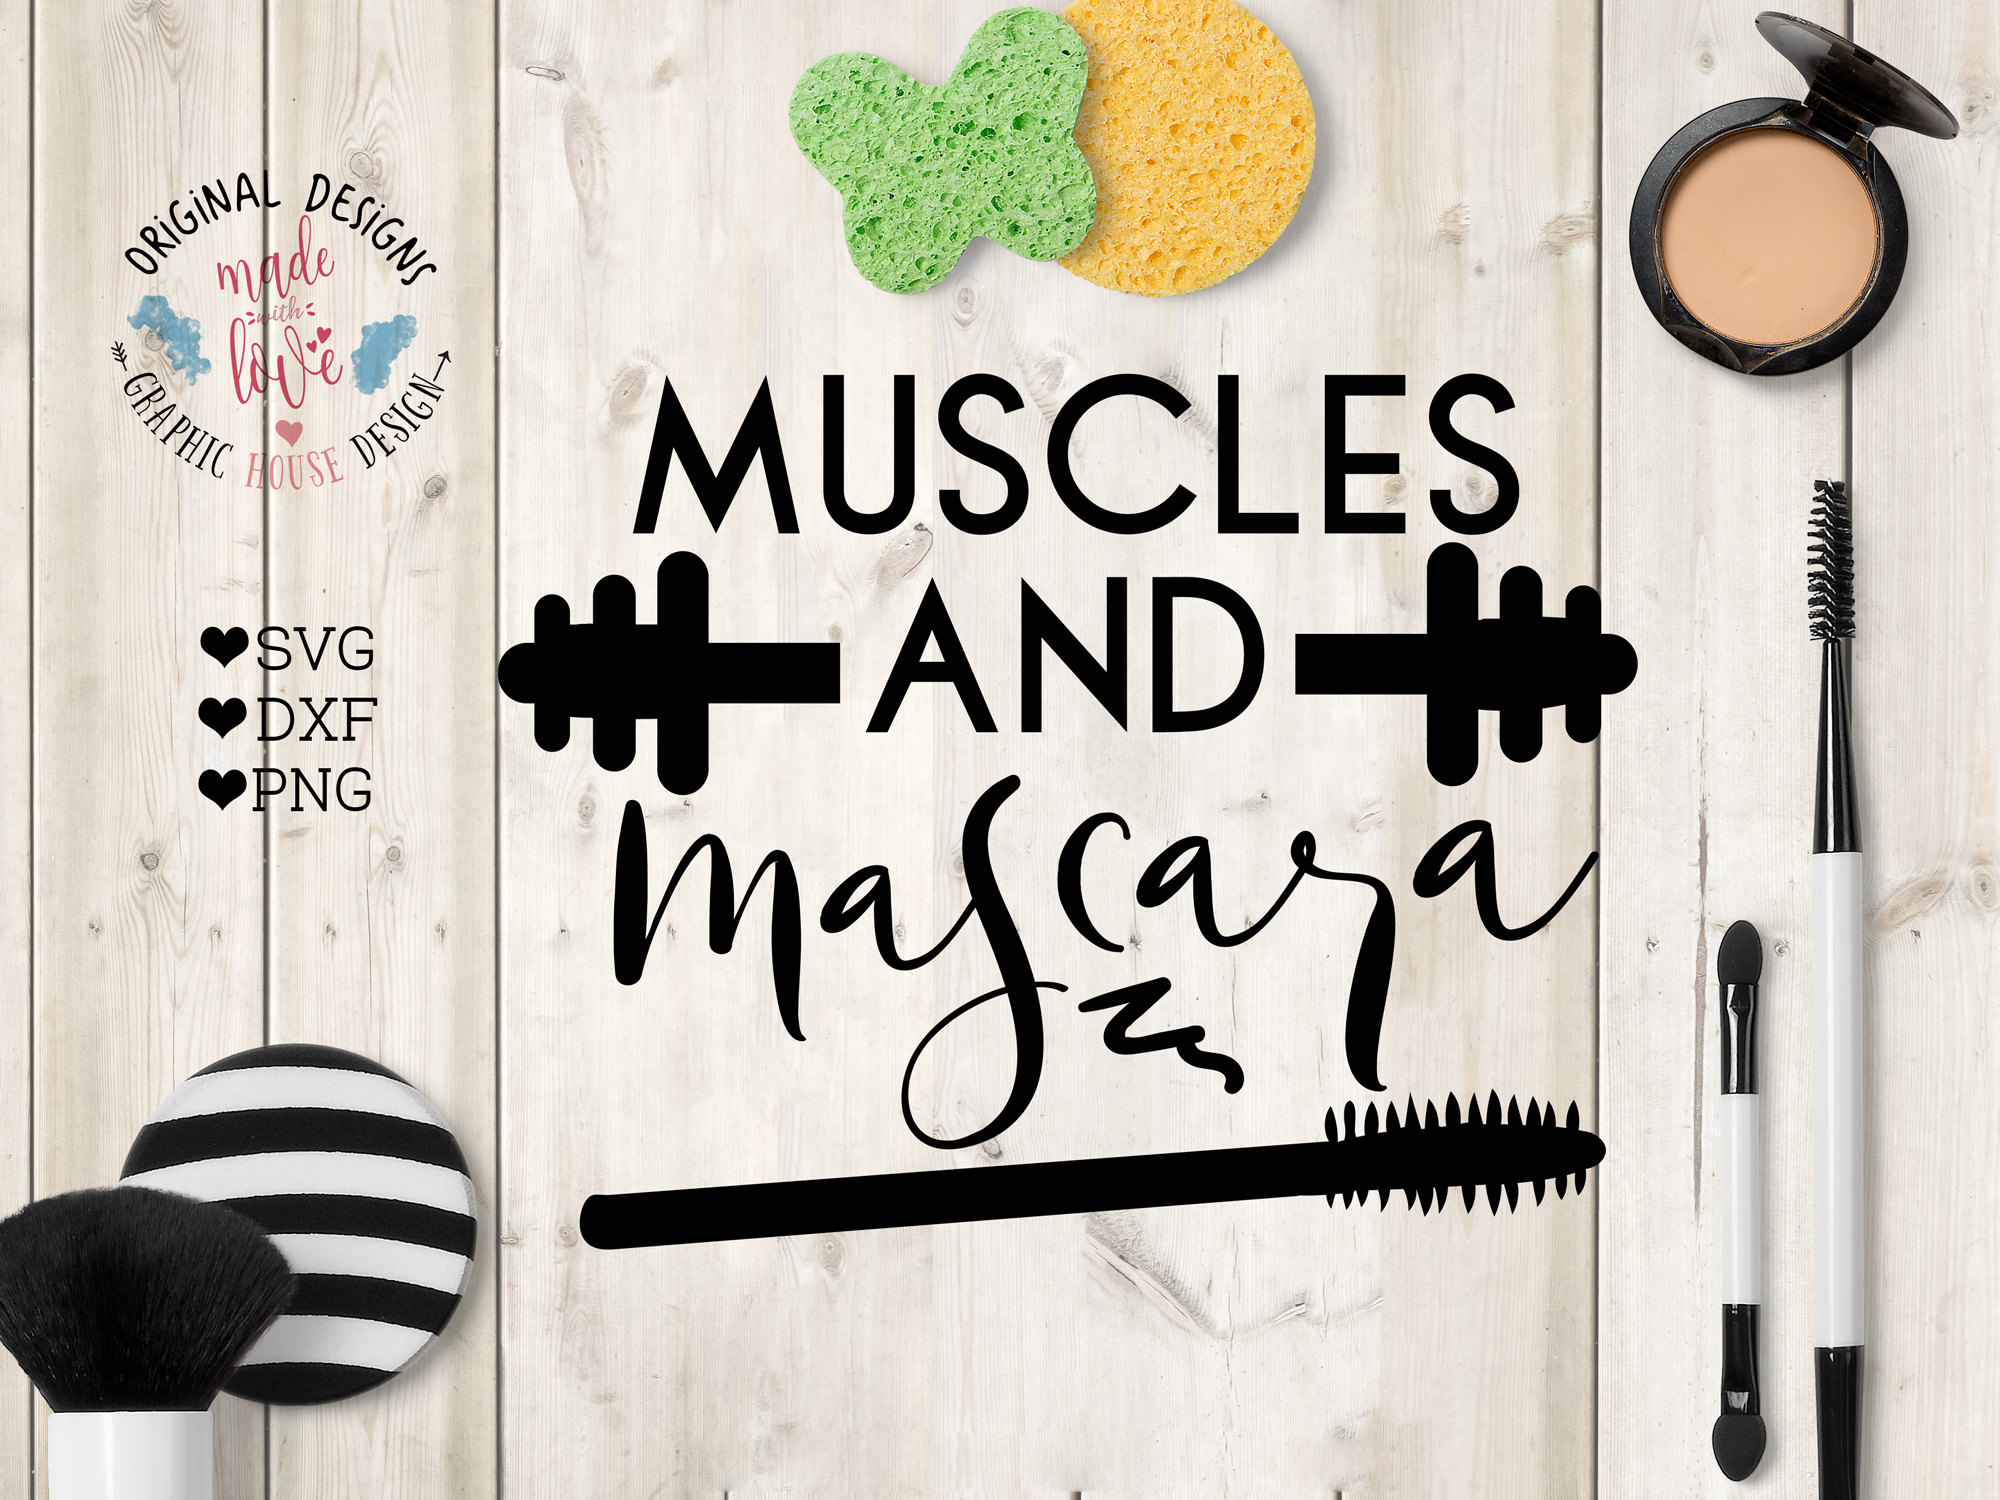 Download Muscles and Mascara Cutting File SVG, DXF, PNG (27613 ...